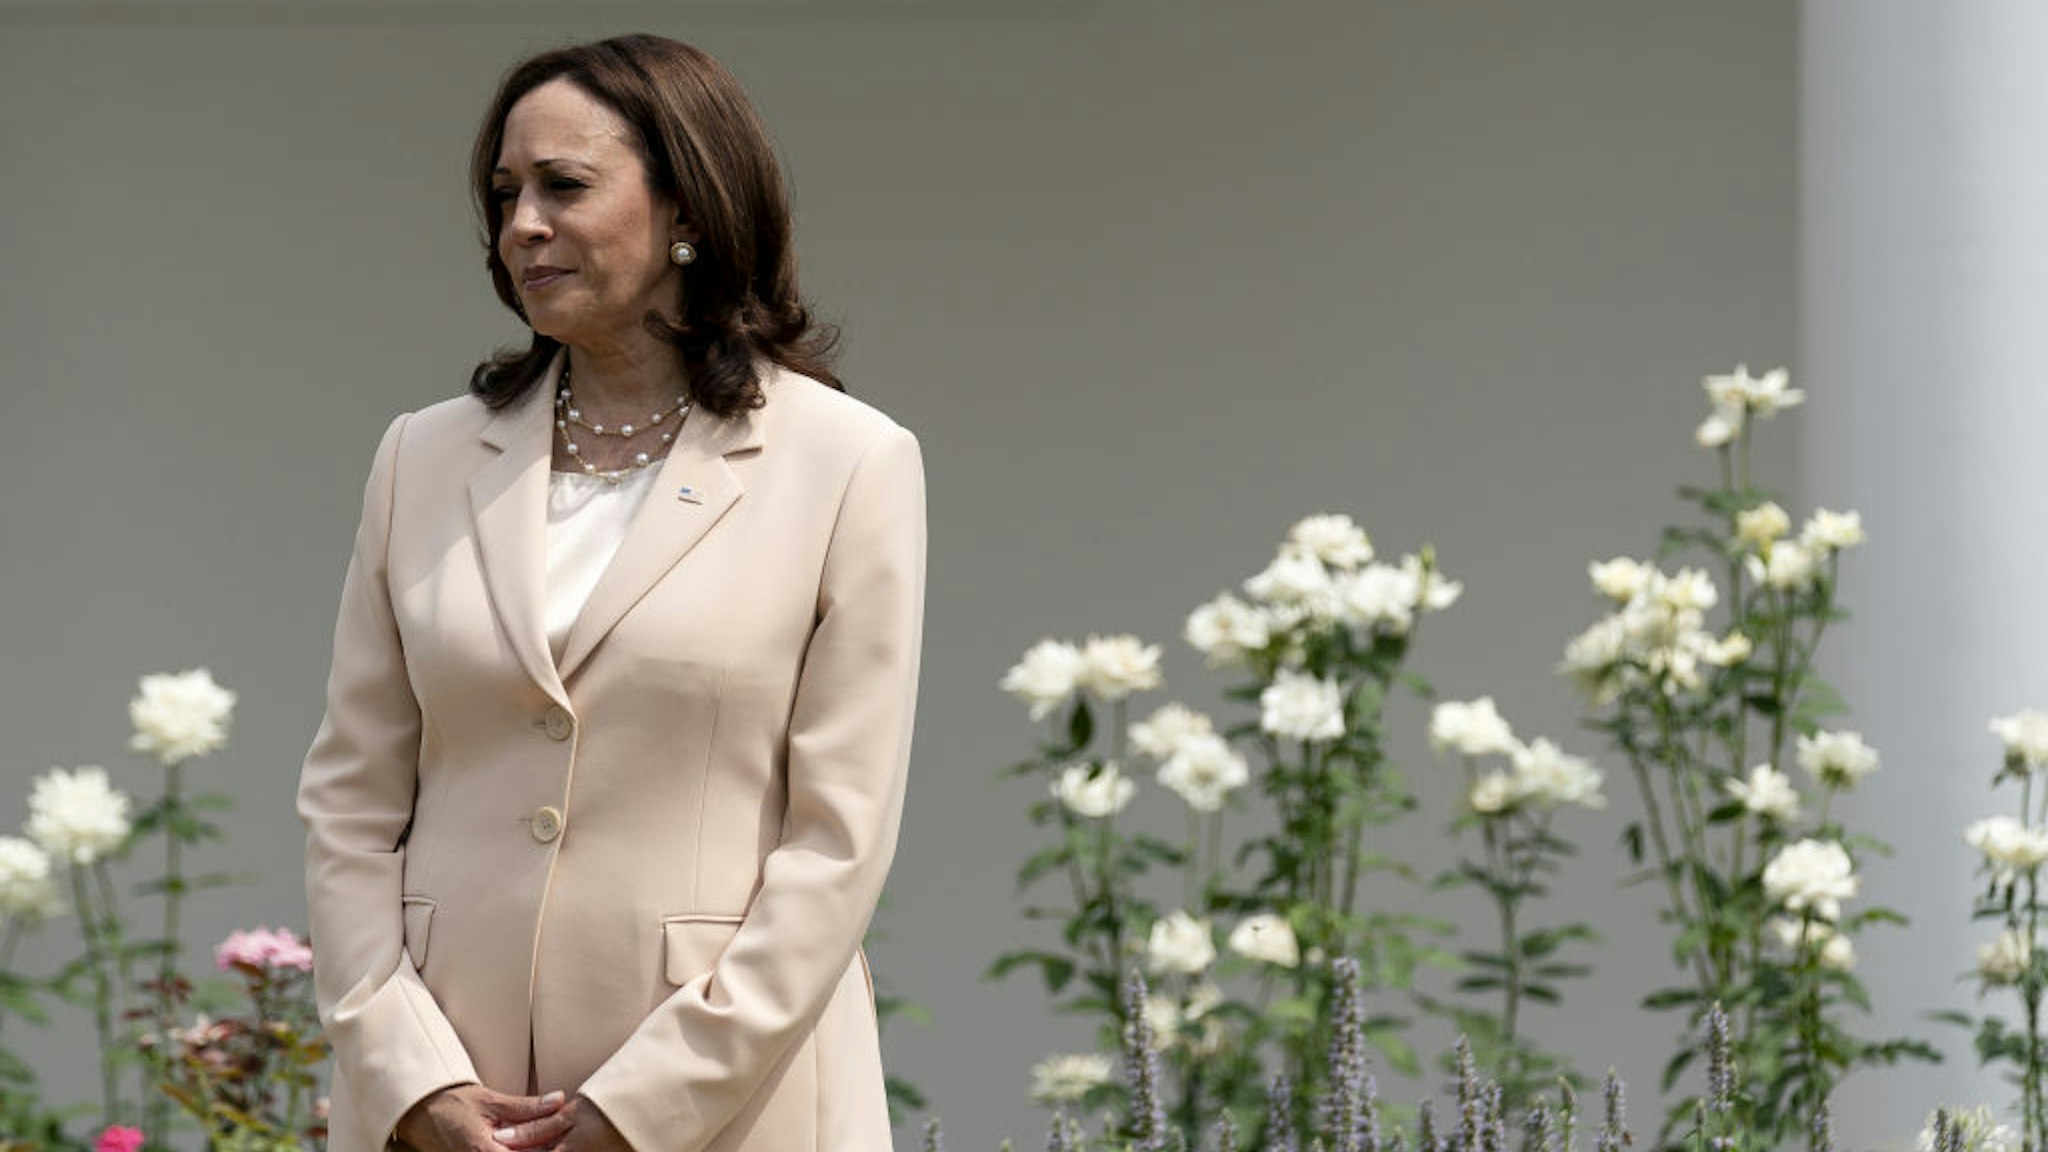 U.S. Vice President Kamala Harris listens during an event marking the 31st anniversary of the Americans with Disabilities Act (ADA) in the Rose Garden of the White House in Washington, D.C., U.S., on Monday, July 26, 2021.